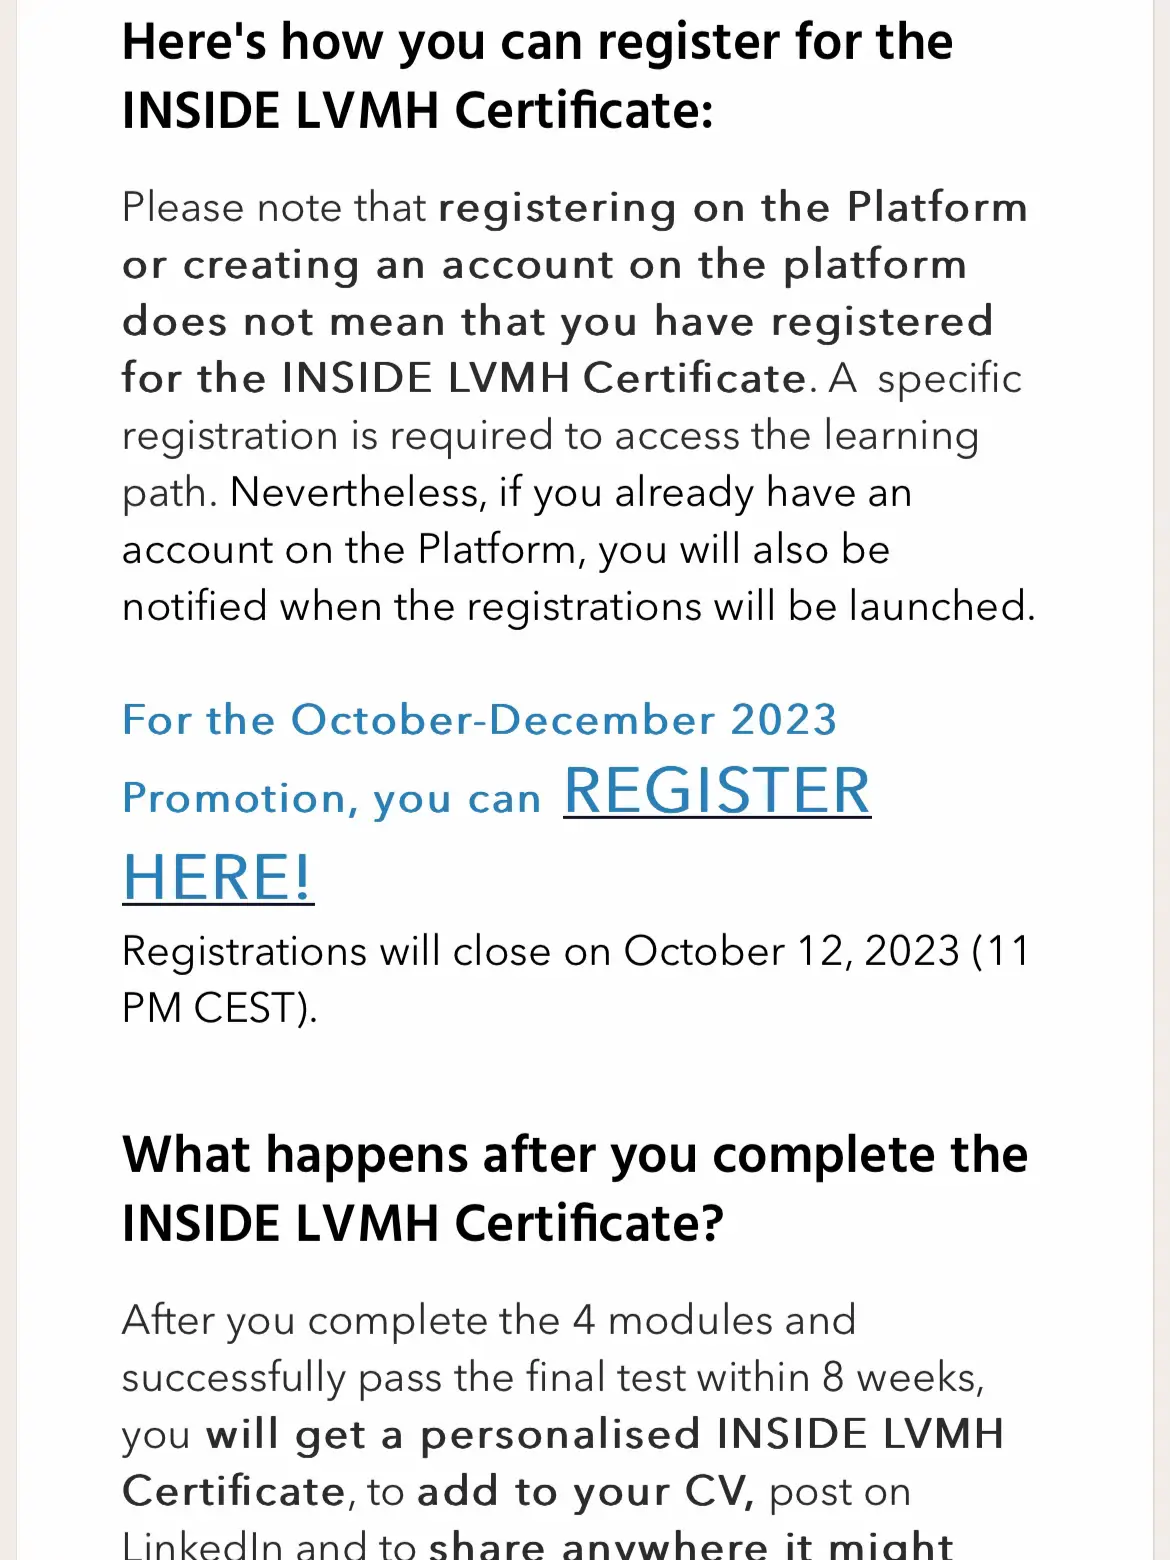 INSIDE LVMH CERTIFICATE - Registrations for Promotion 3 are open